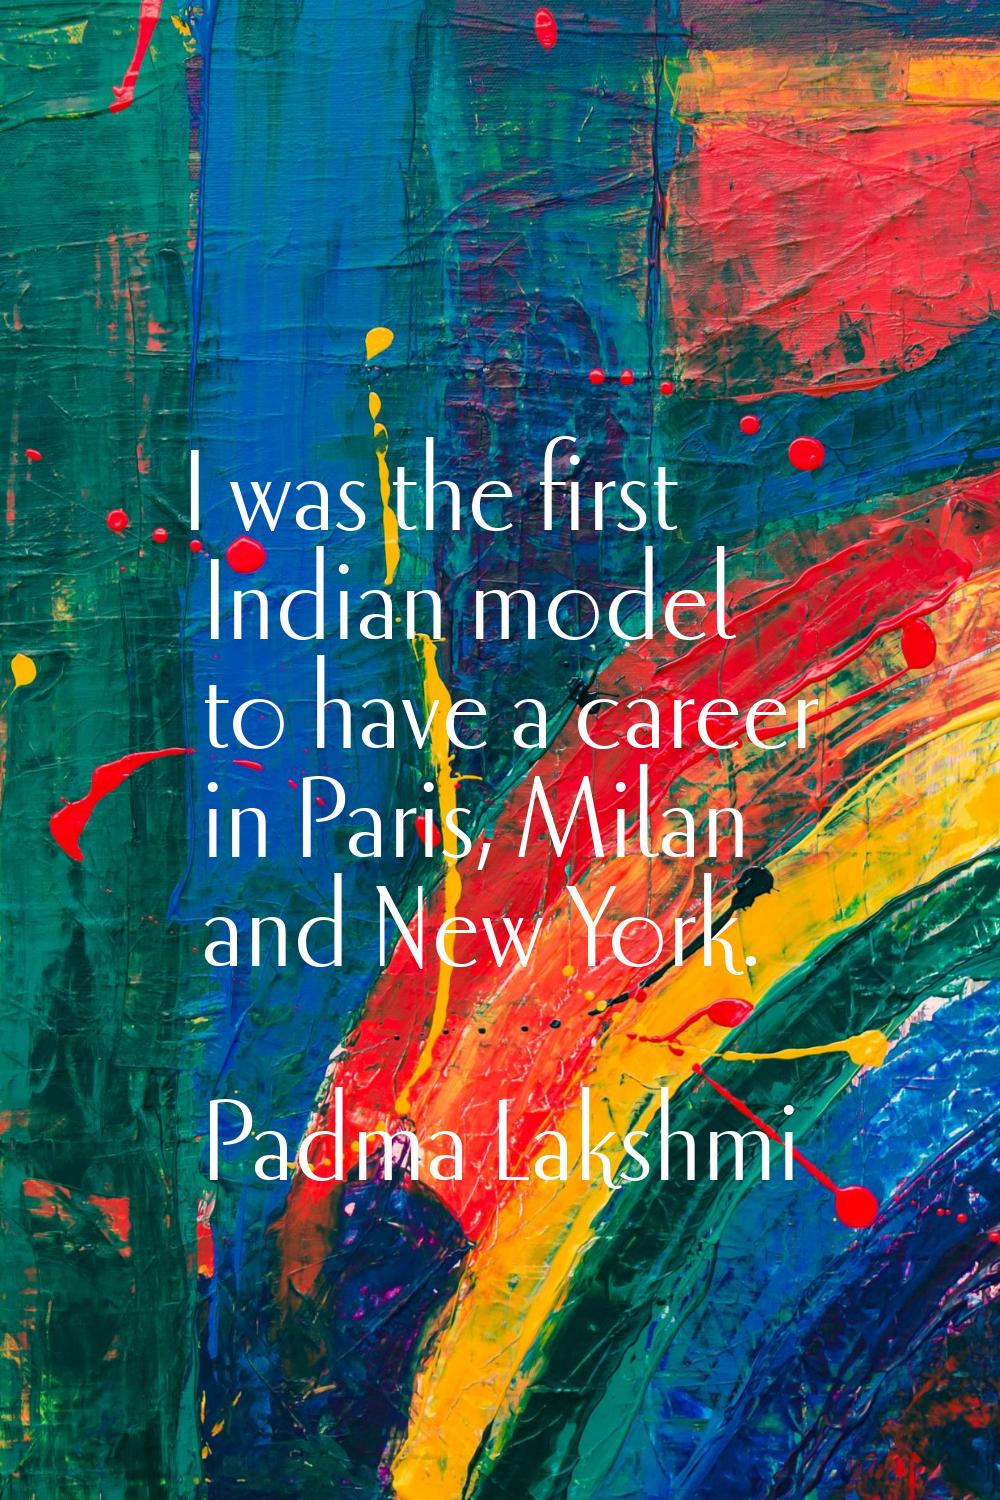 I was the first Indian model to have a career in Paris, Milan and New York.